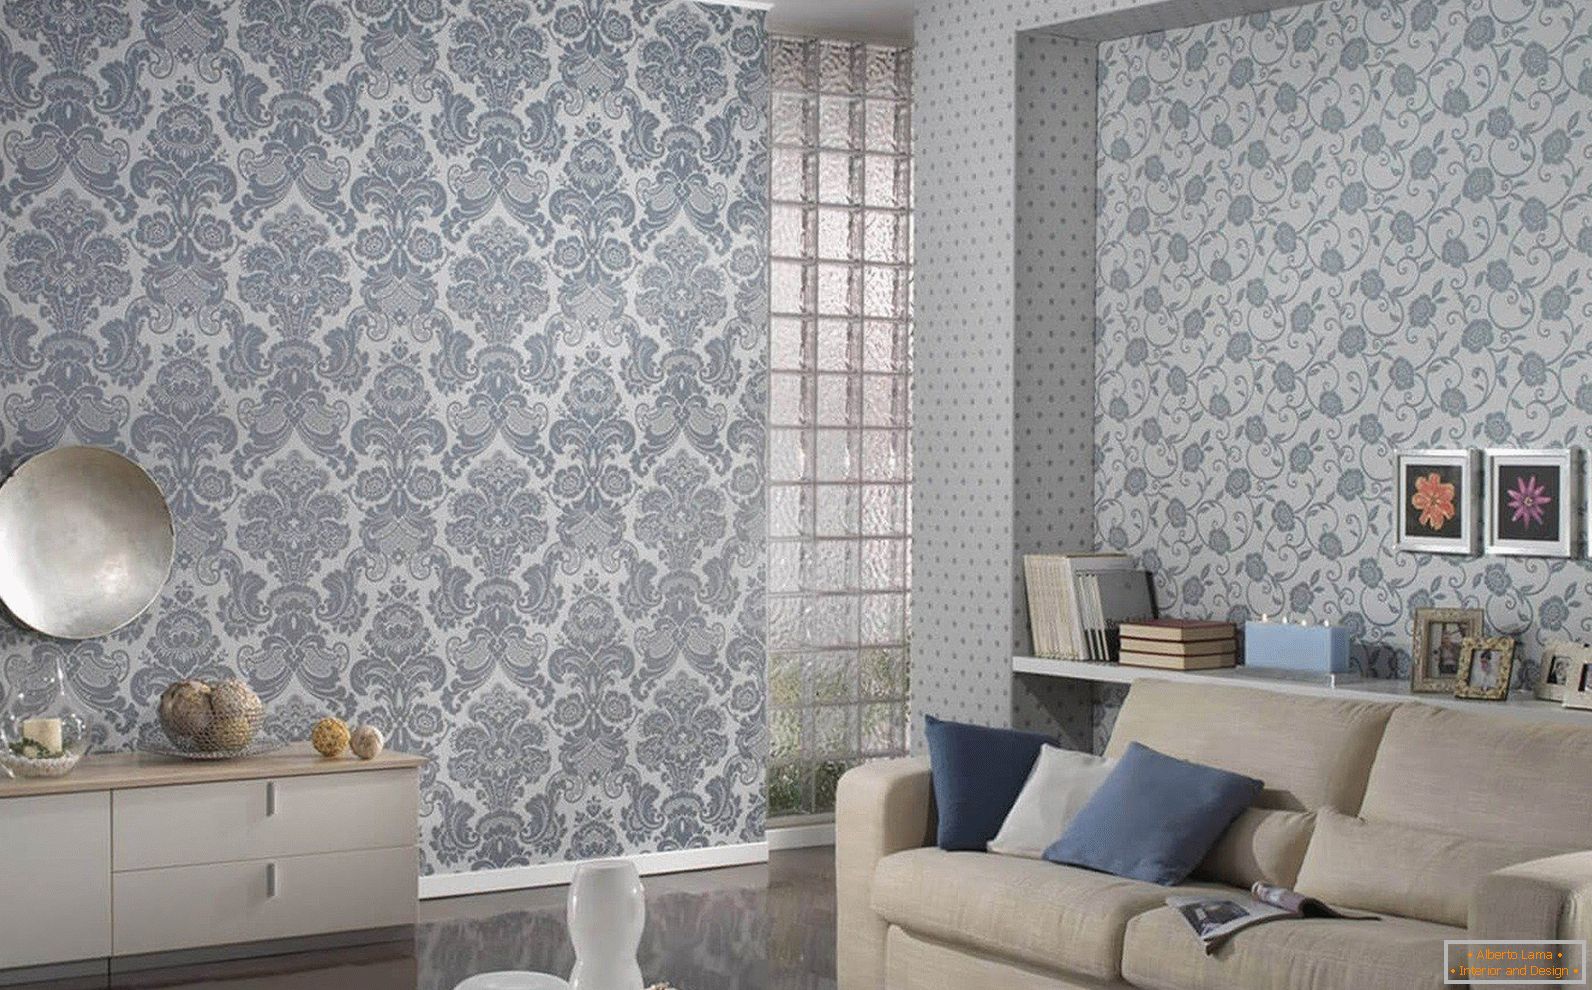 We use three types of wallpaper in the interior of the living room